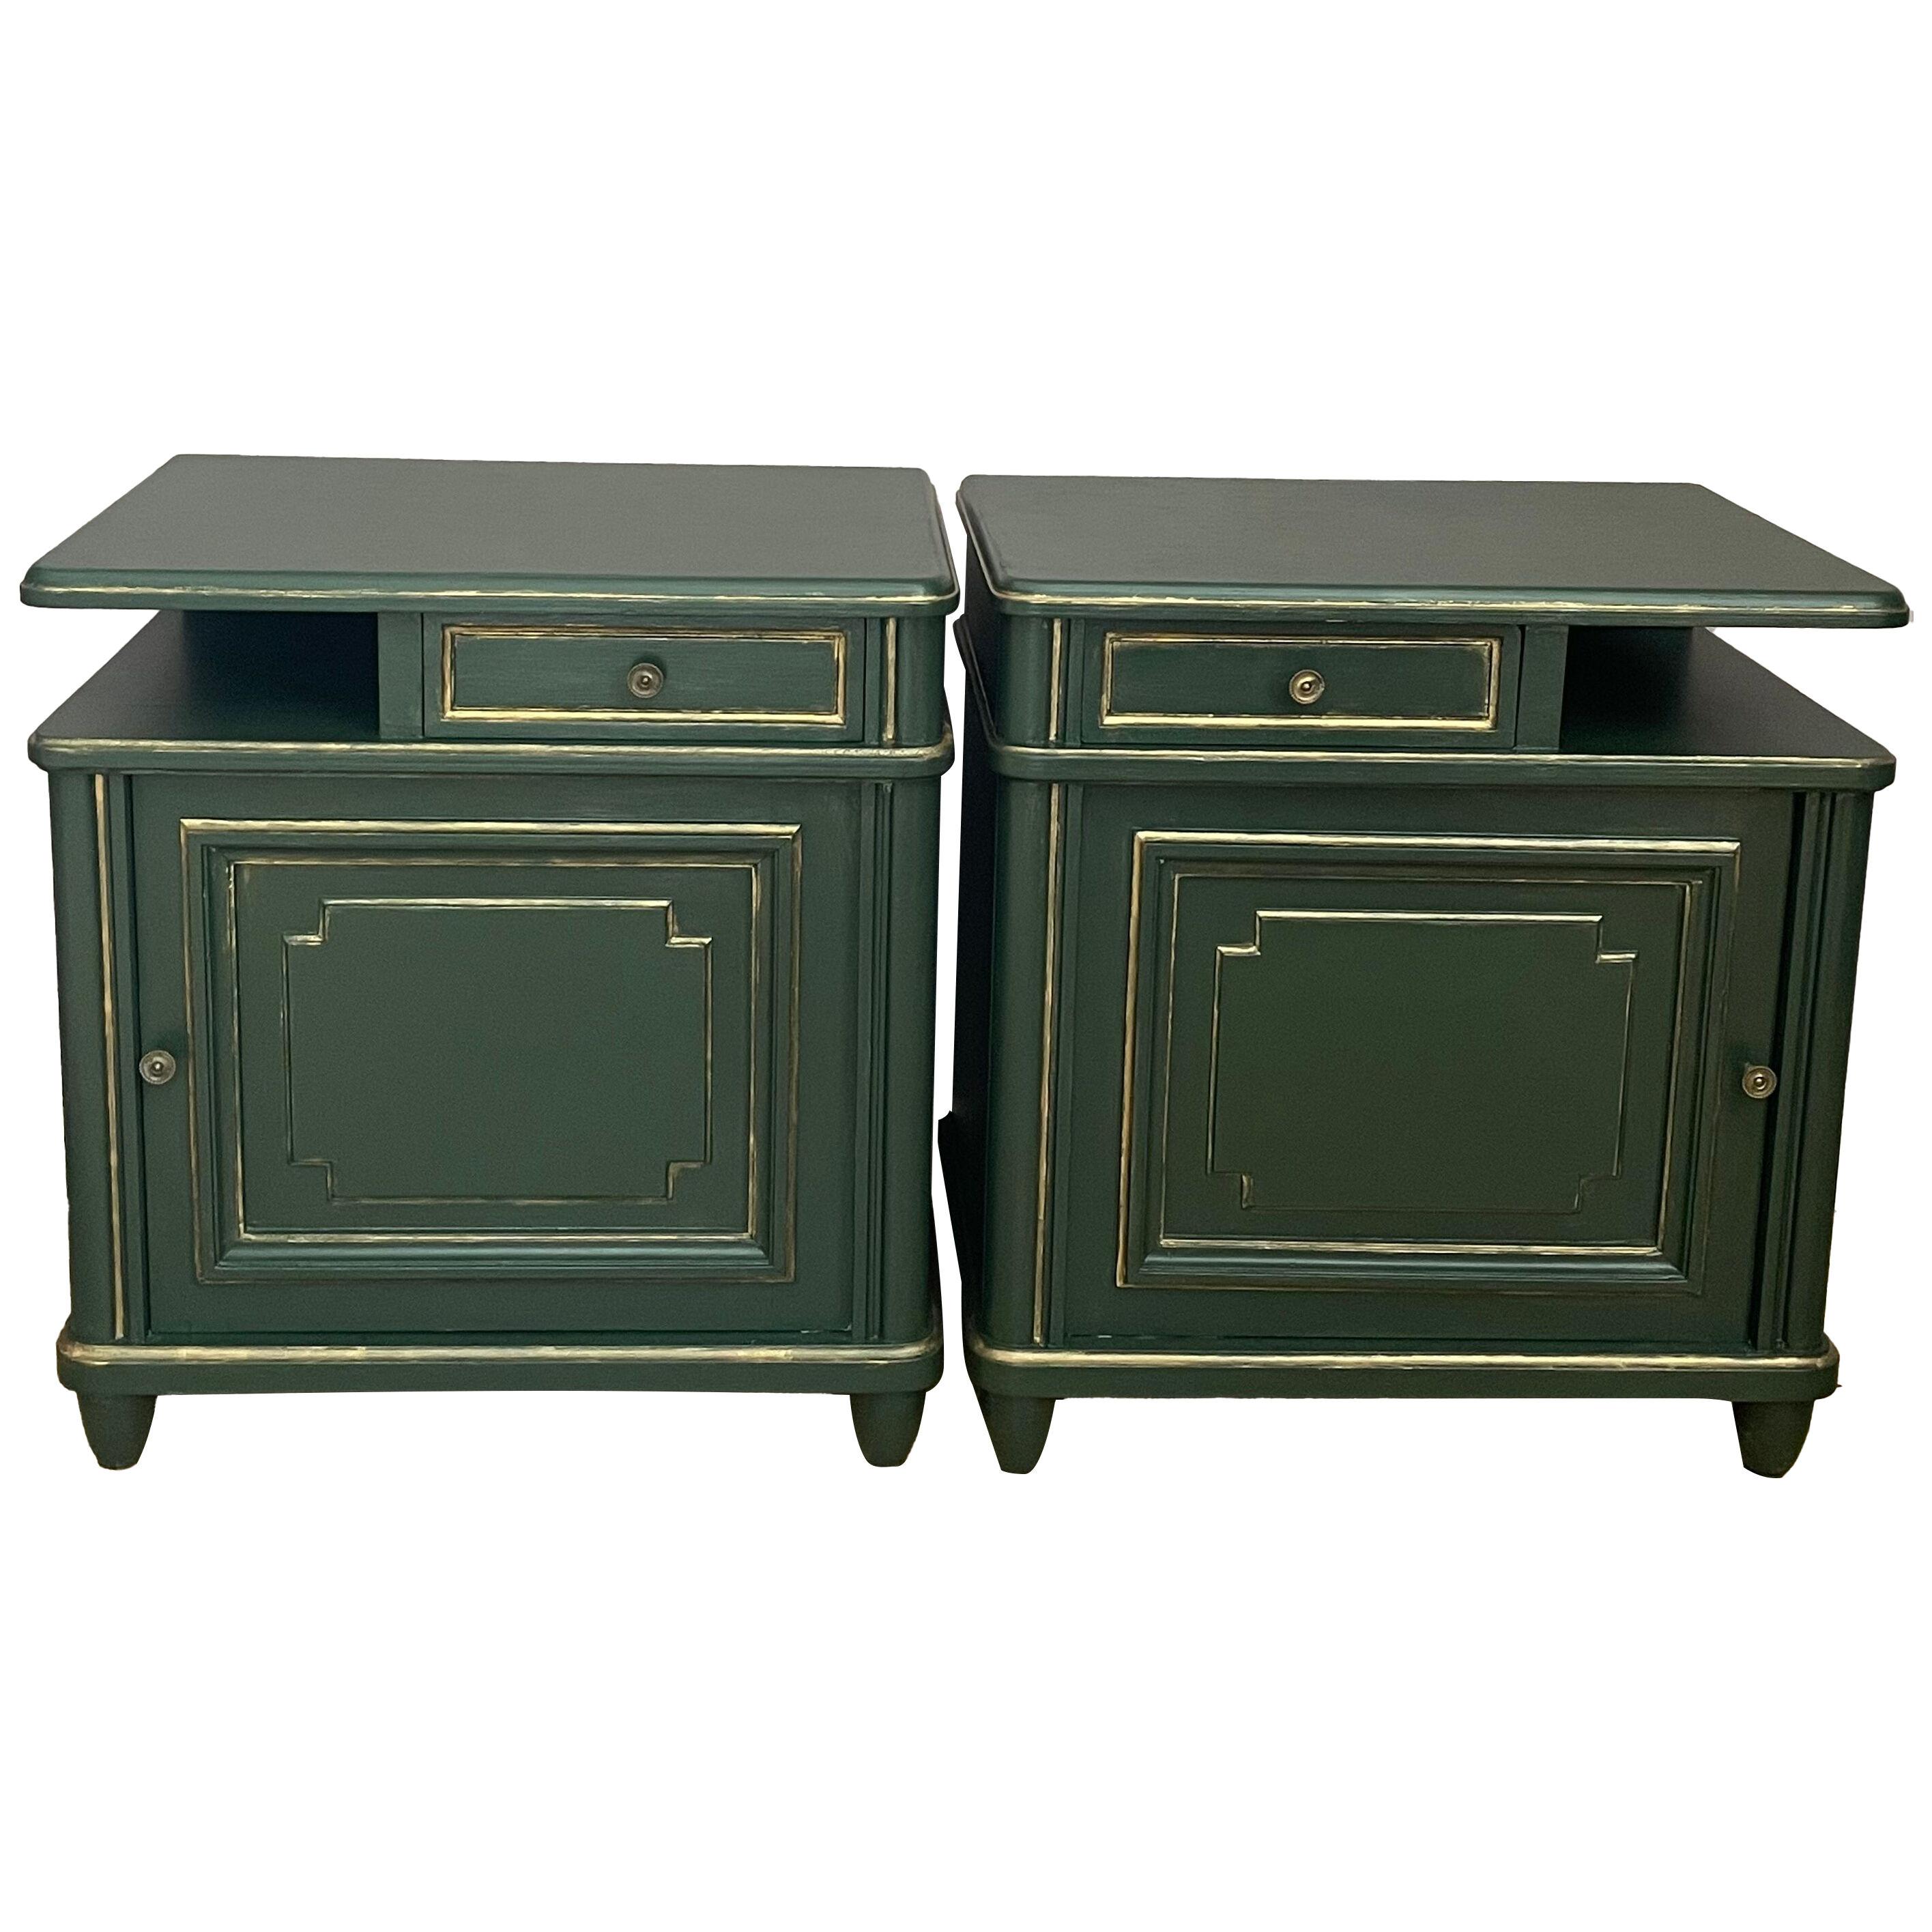 Pair of painted green Art Deco night stands 